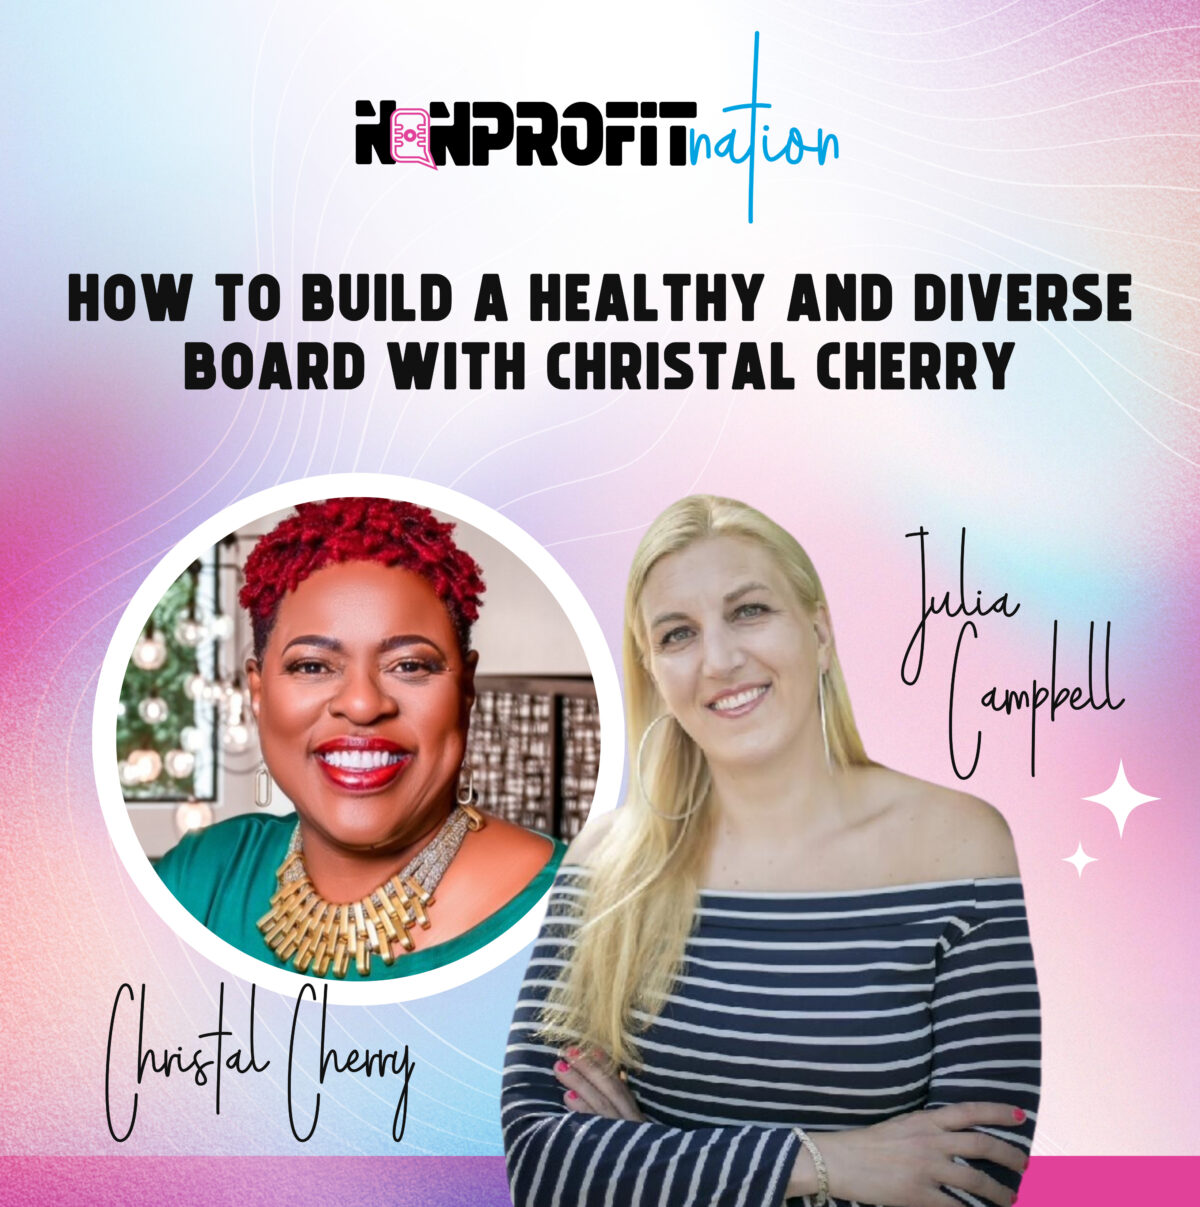 How to Build a Healthy and Diverse Board with Christal Cherry